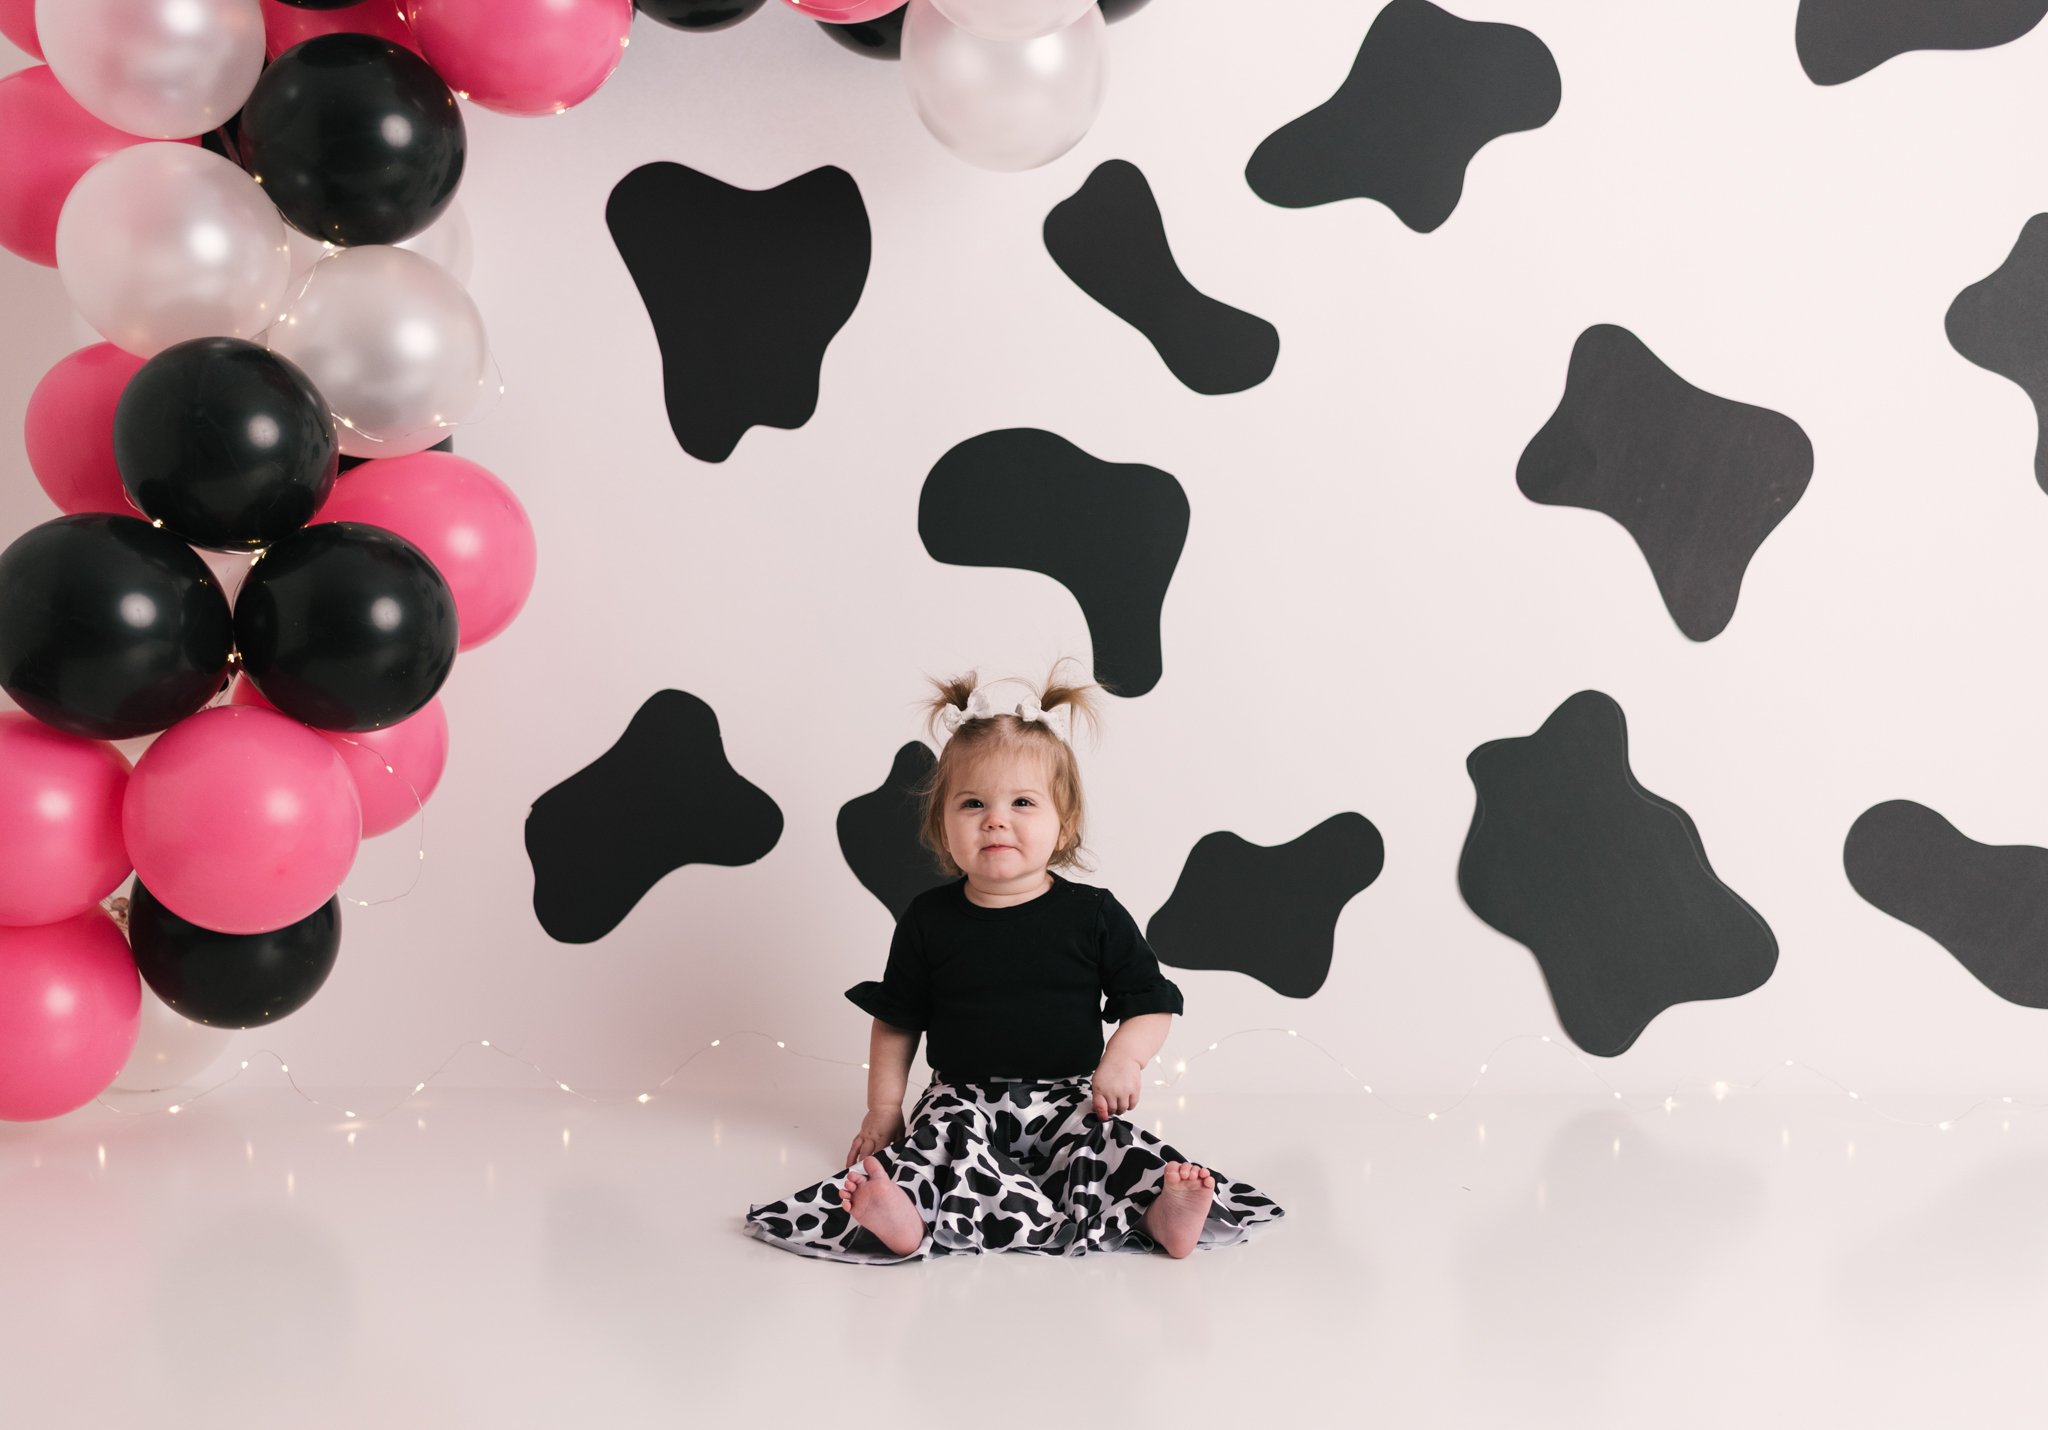 Holy_Cow_Frist_Birthday_Girl_Smash_and_Splash_Session_Cake_Studio_by_Erika_Child_and_Family_Photographer_for_Christie_Leigh_Photo_in_Cortland_OH_Ohio_Trumbull_County_001.jpg